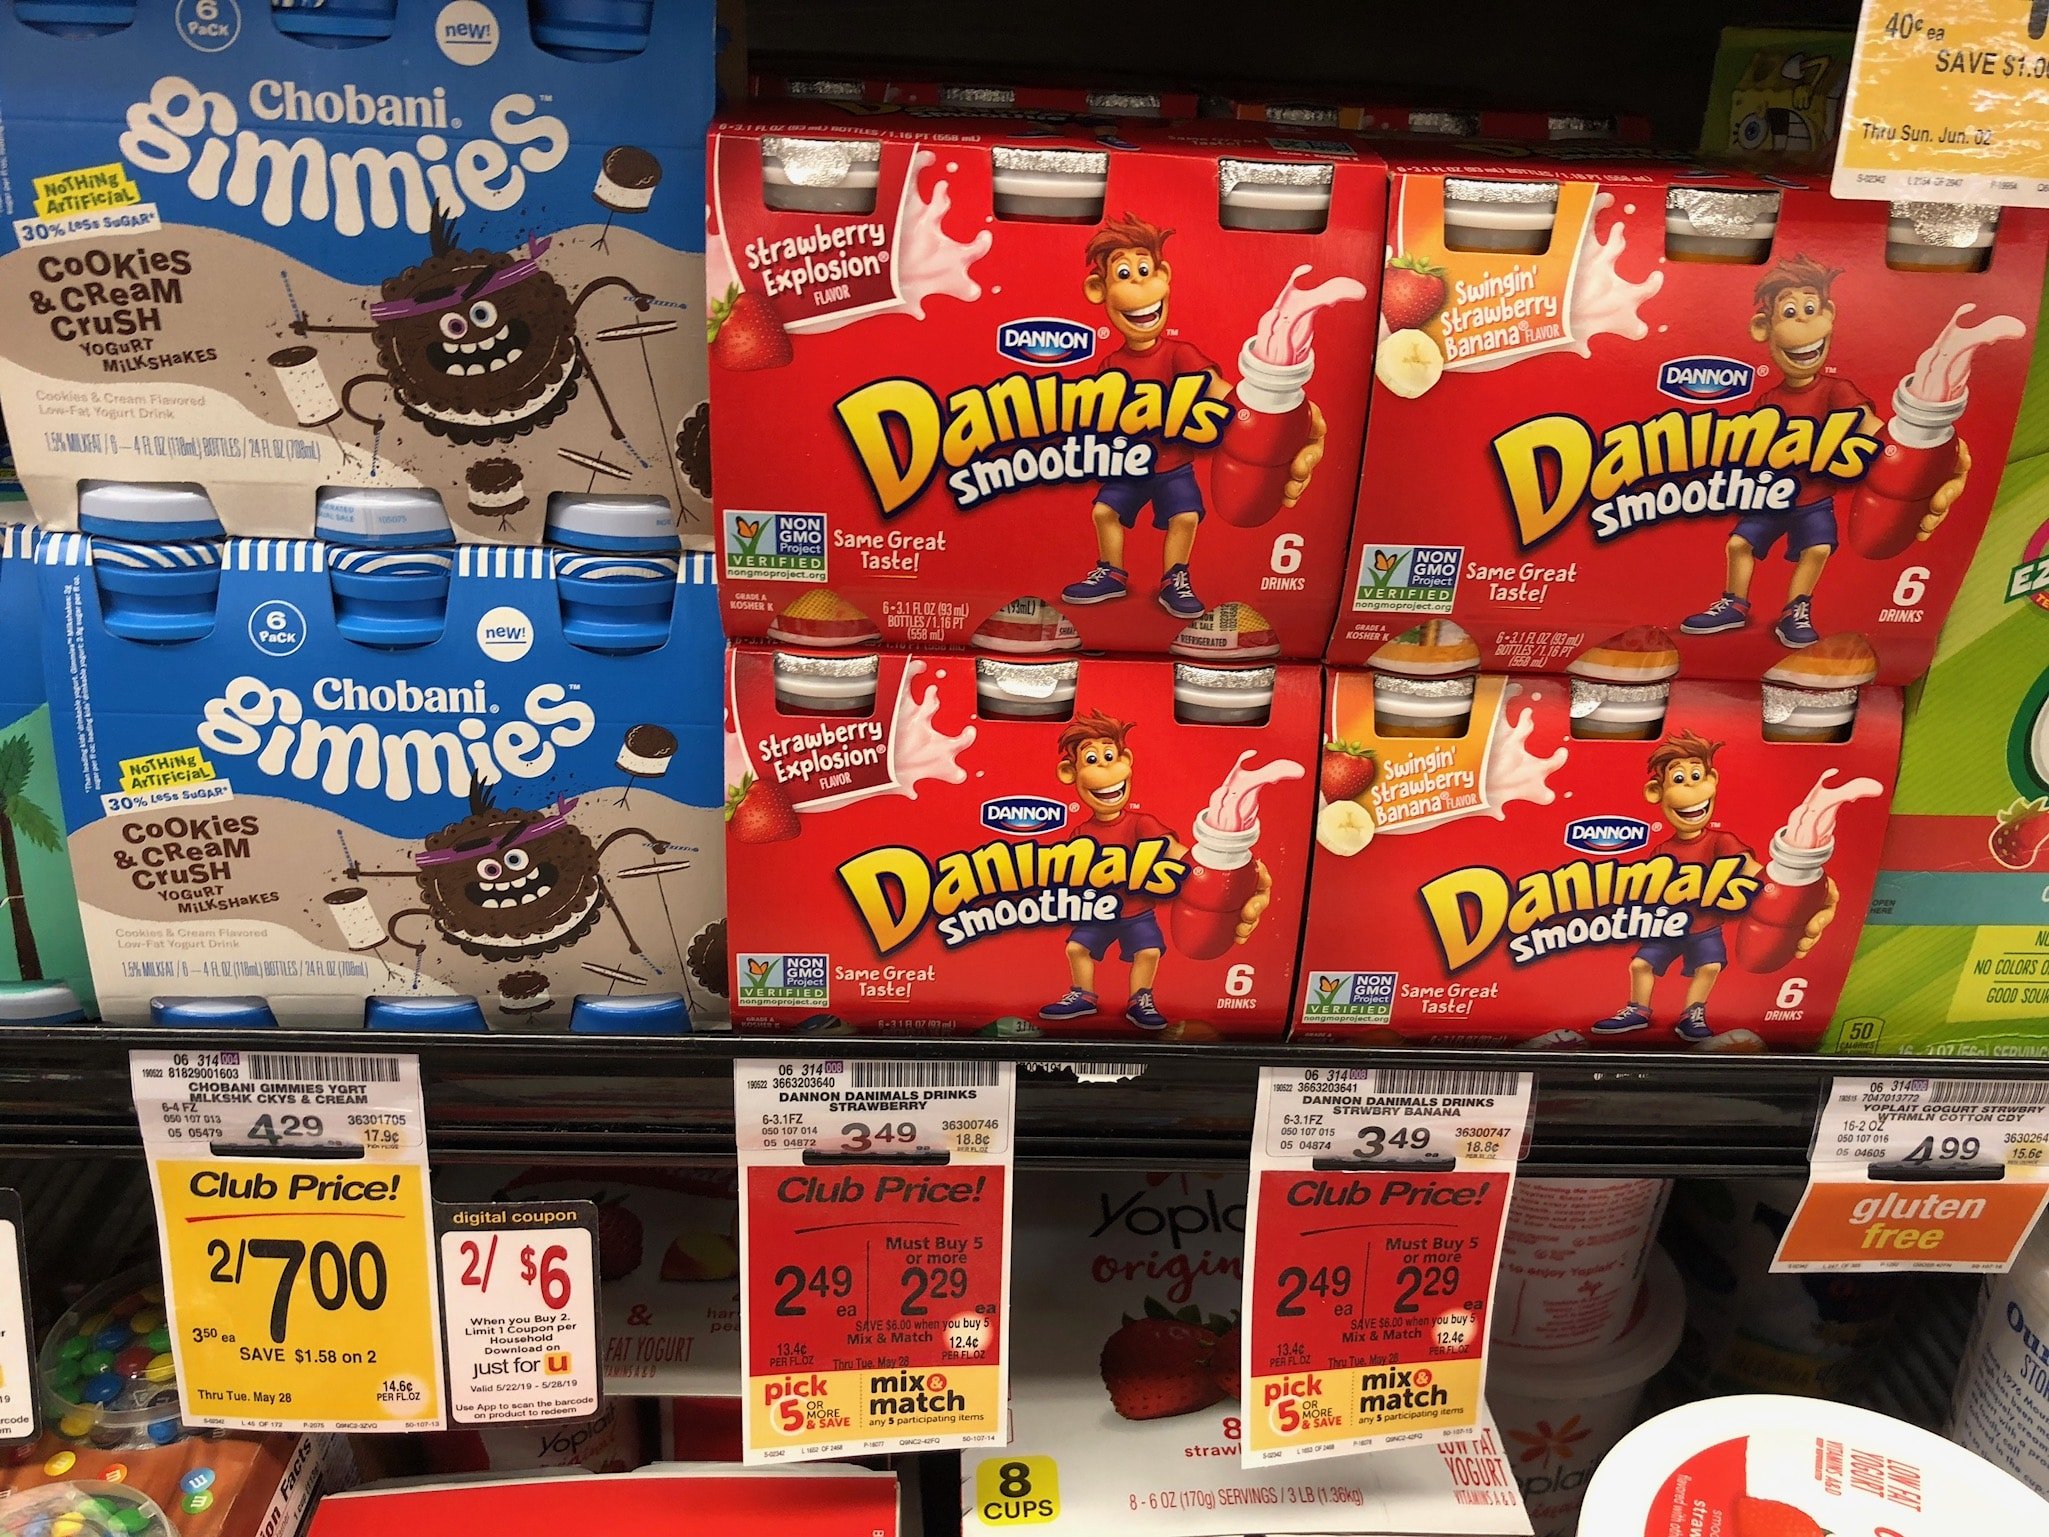 Danimals Smoothies Coupon = $1.29 for a 6 Pack